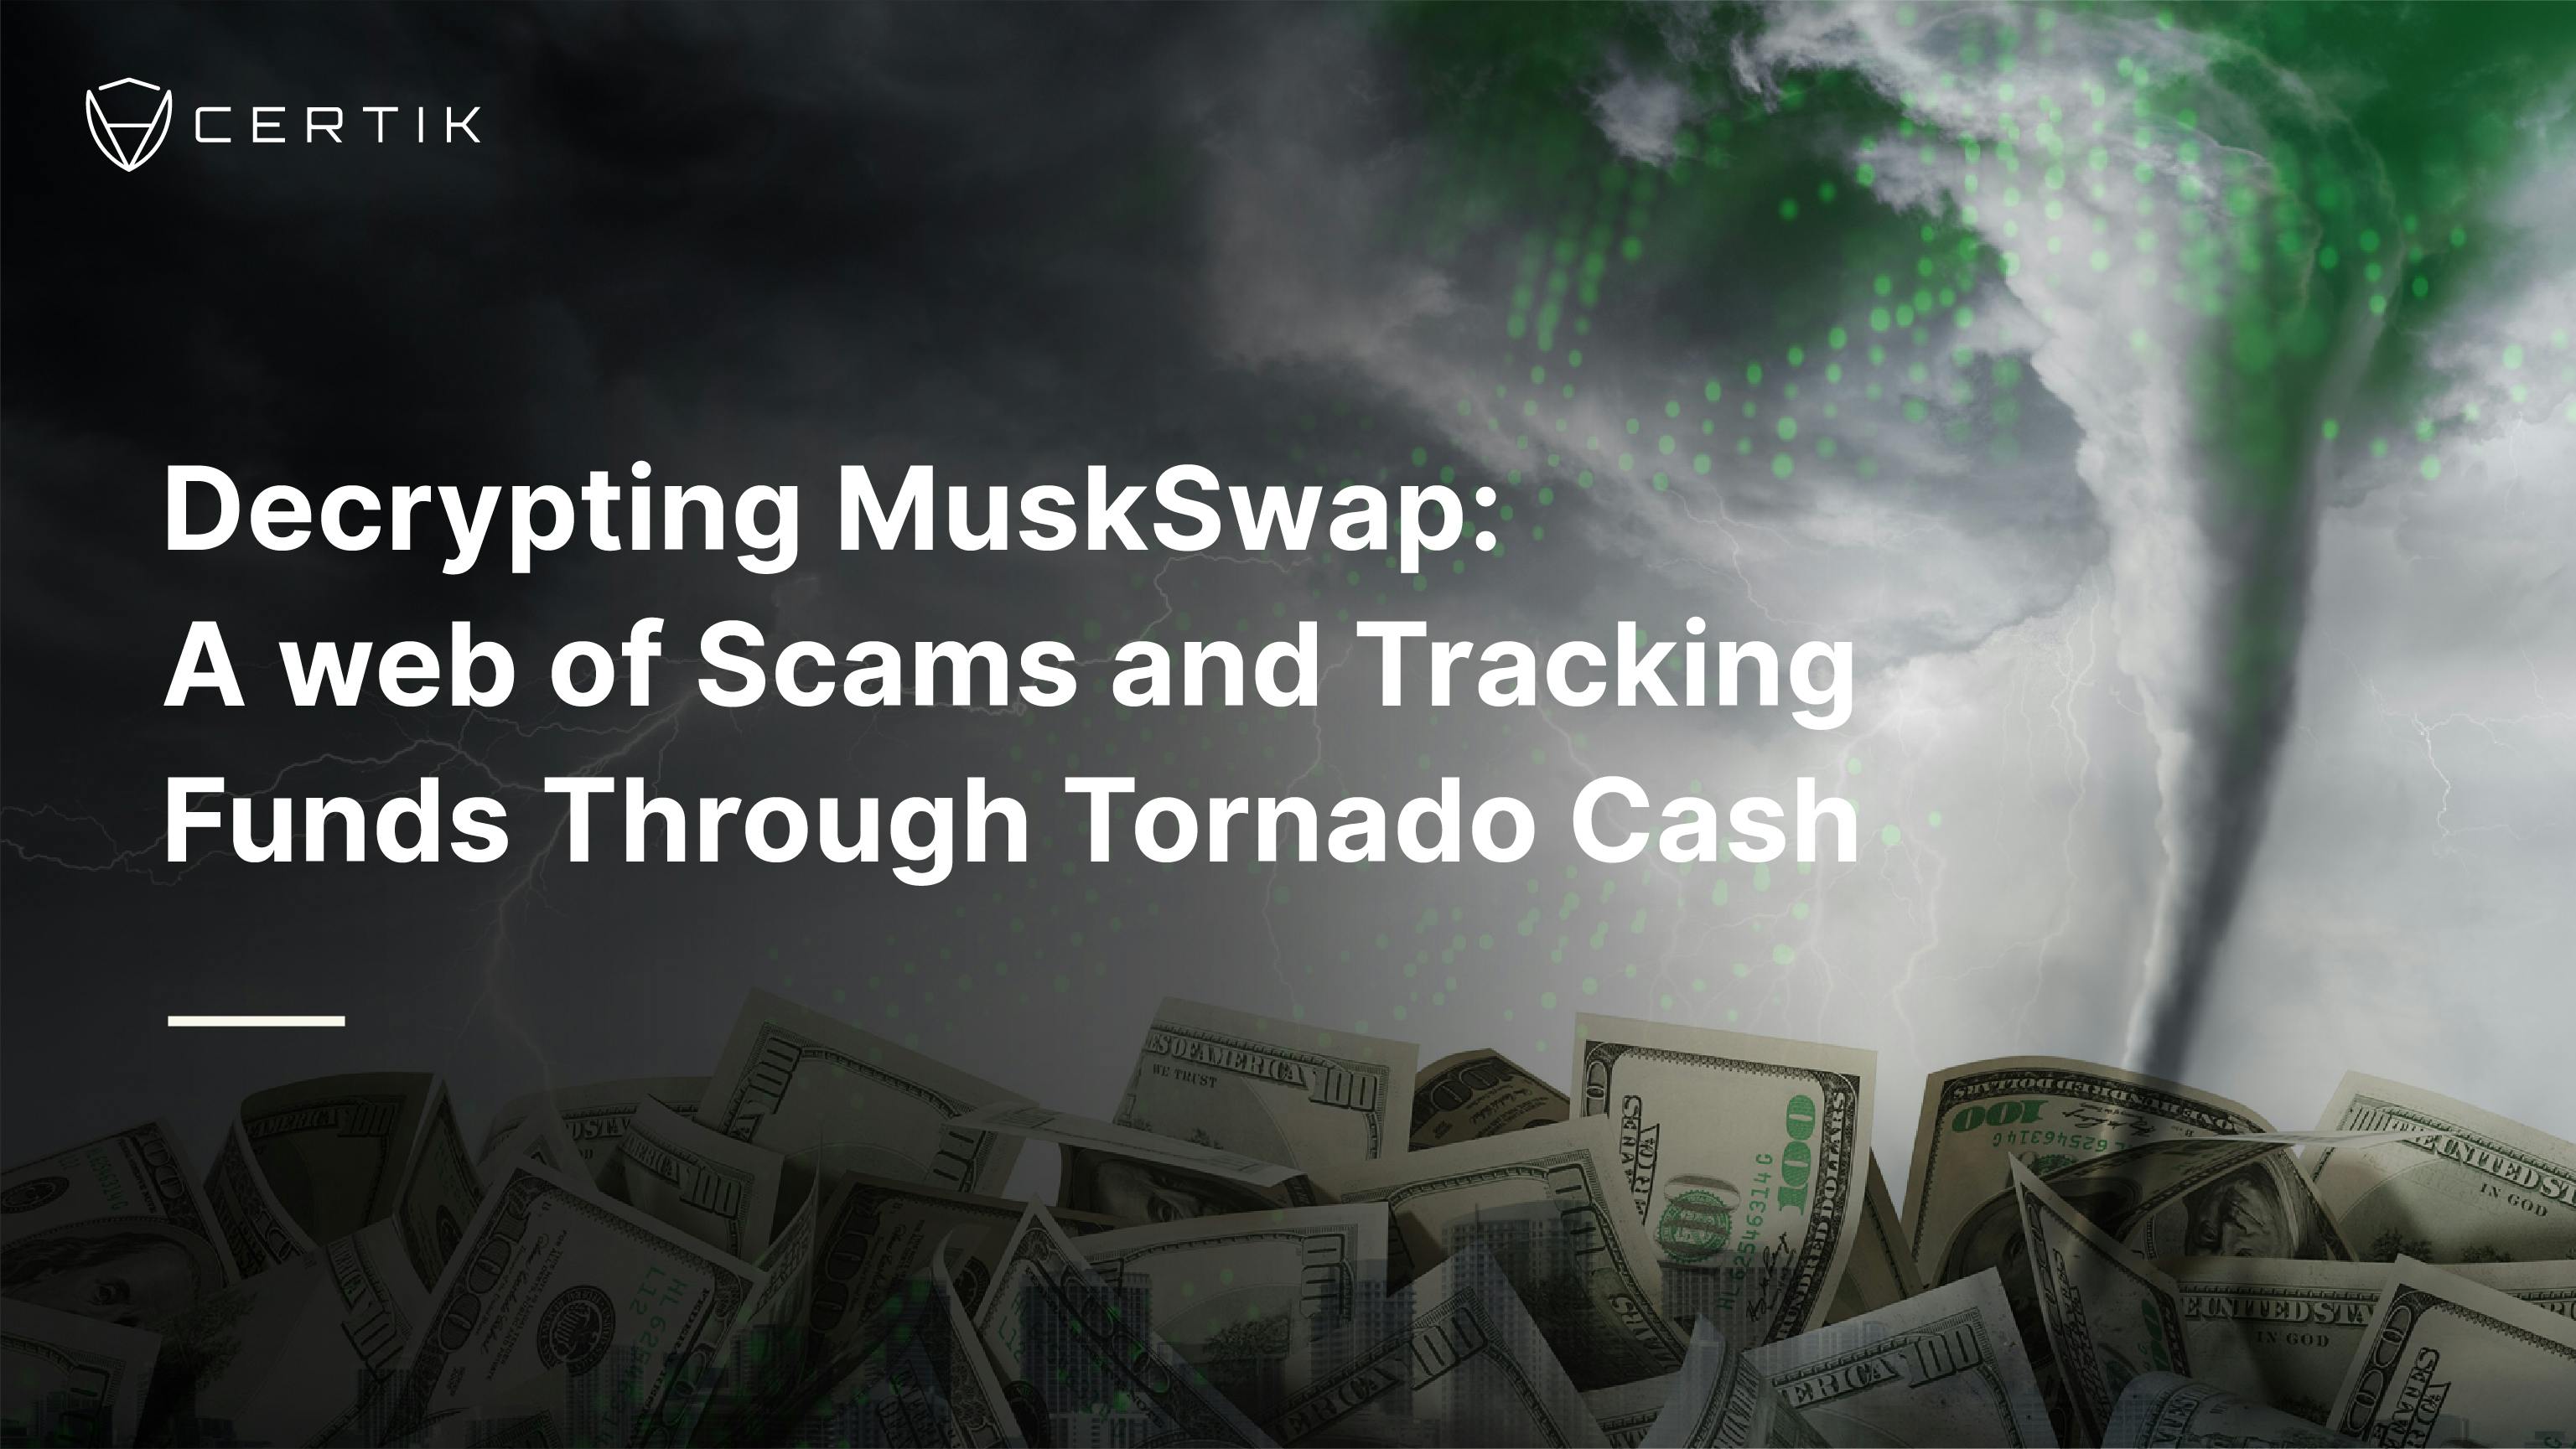 Decrypting MuskSwap: A web of Scams and Tracking Funds Through Tornado Cash